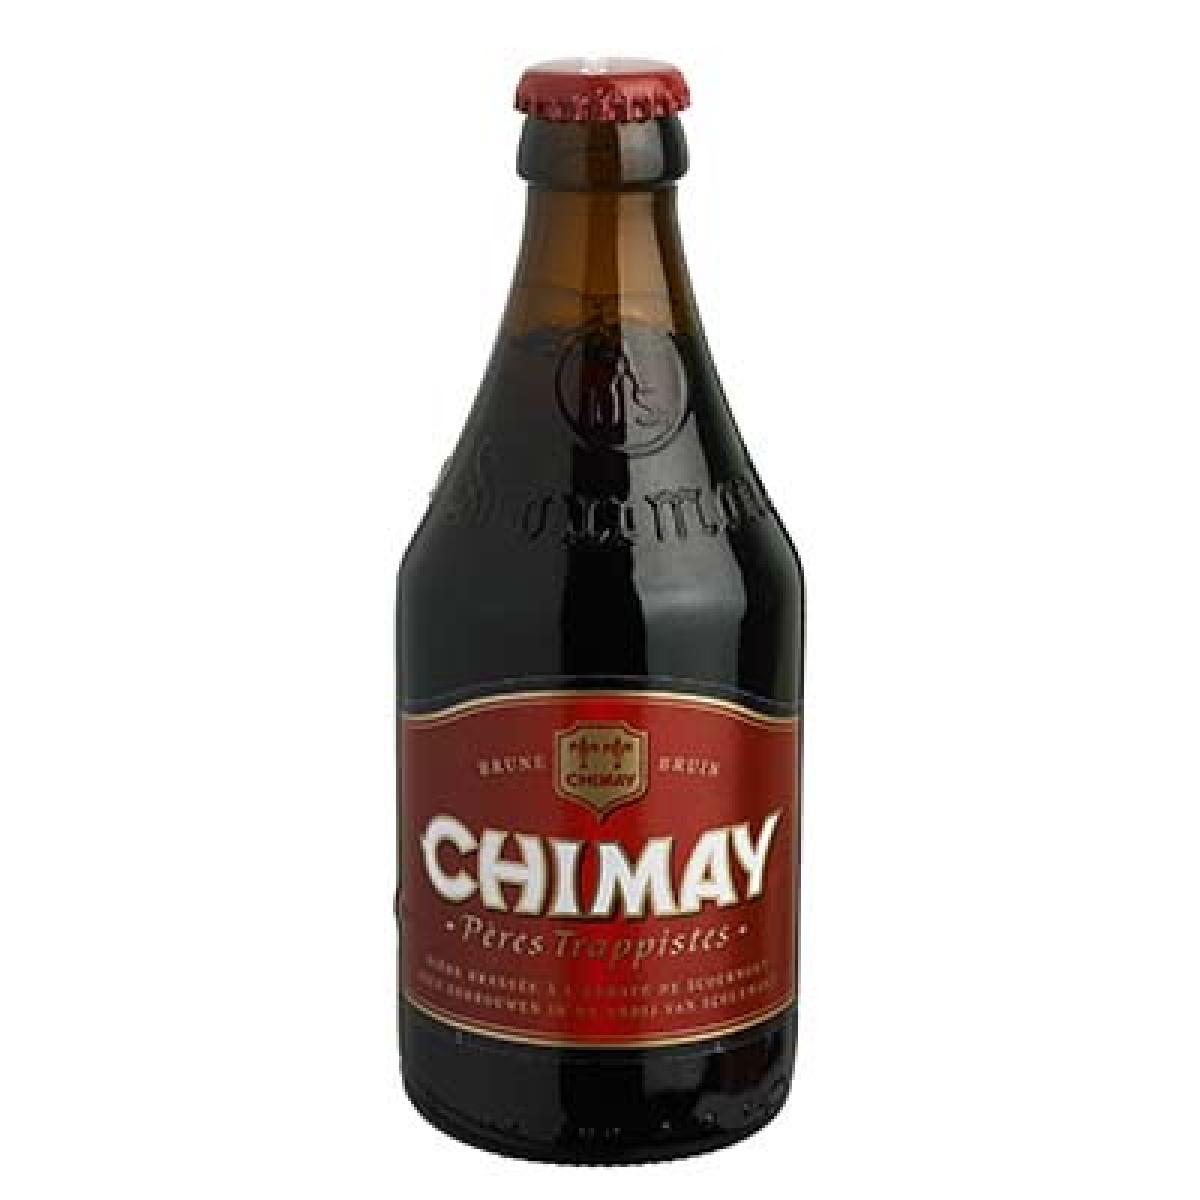 BLLE 33 BIERE CHIMAY RGE